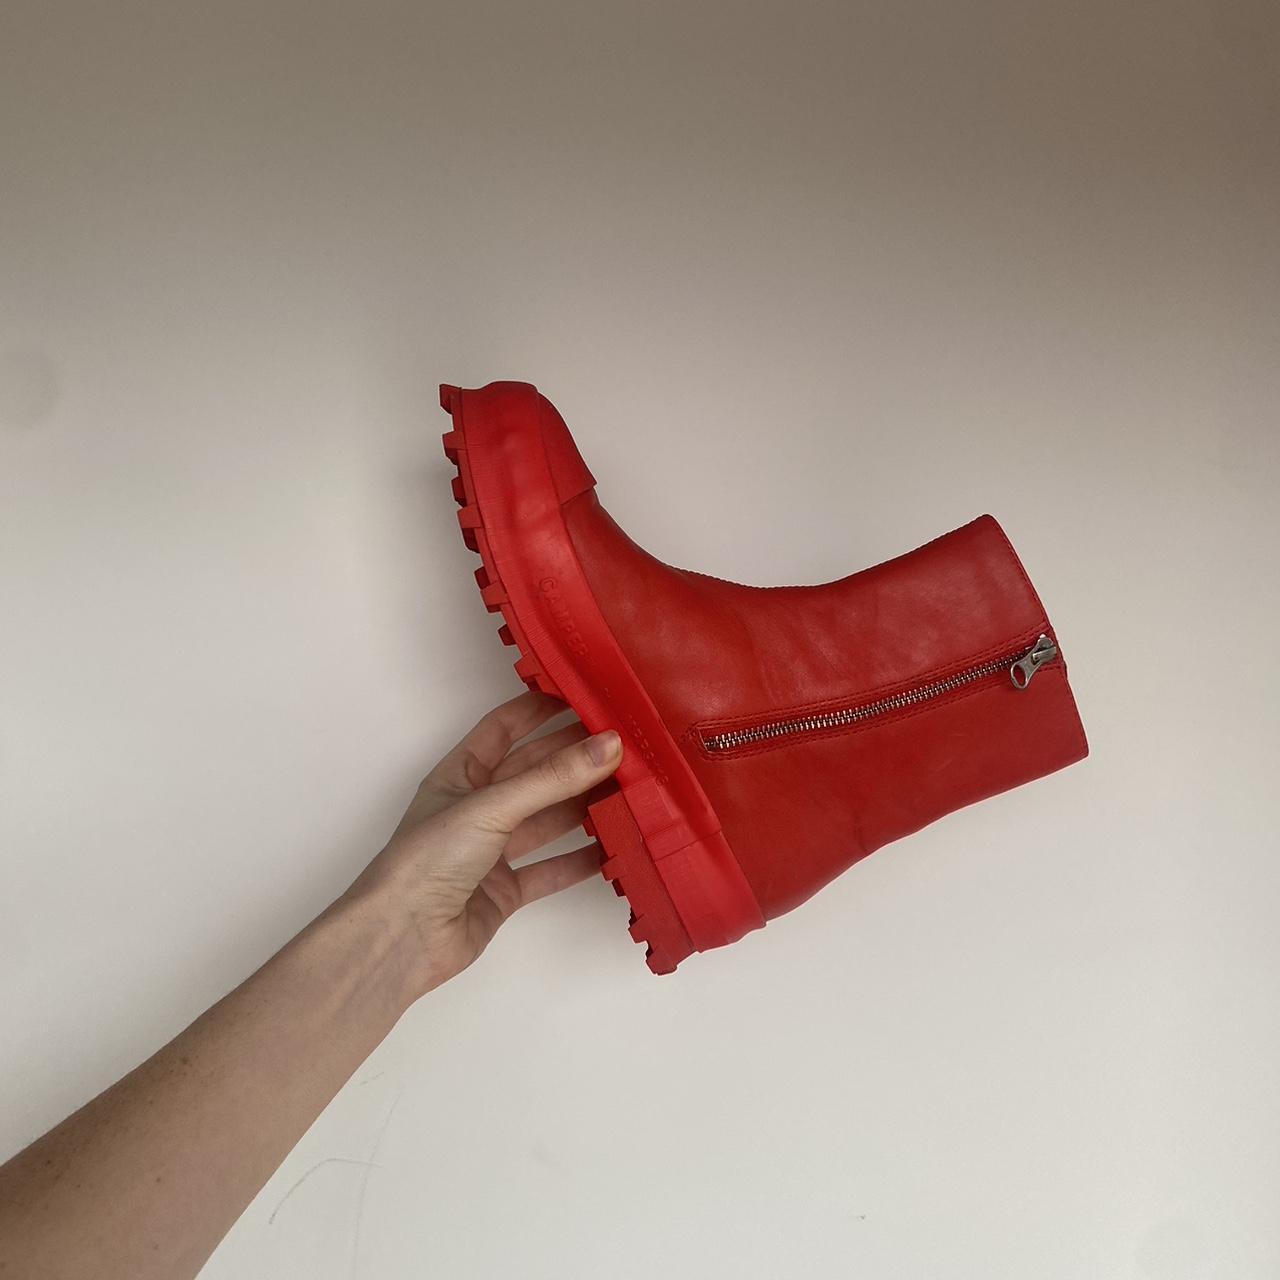 CamperLab Women's Red Boots (3)